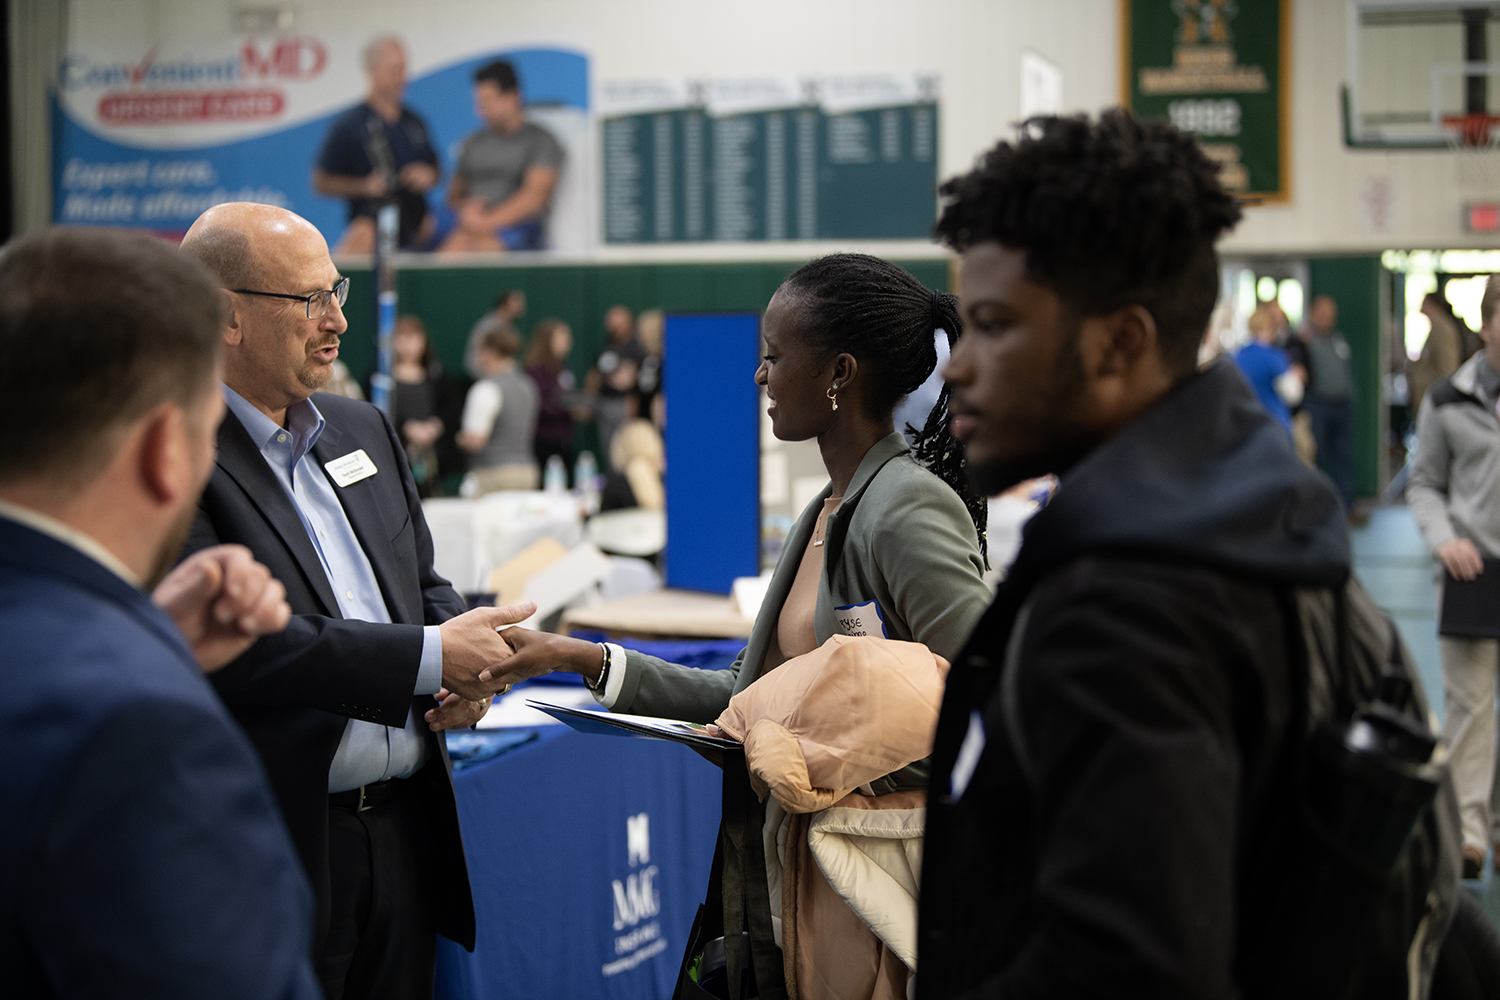 Students are shown interacting with an organization representative at the 2022 Fall Career Fair at Husson University.